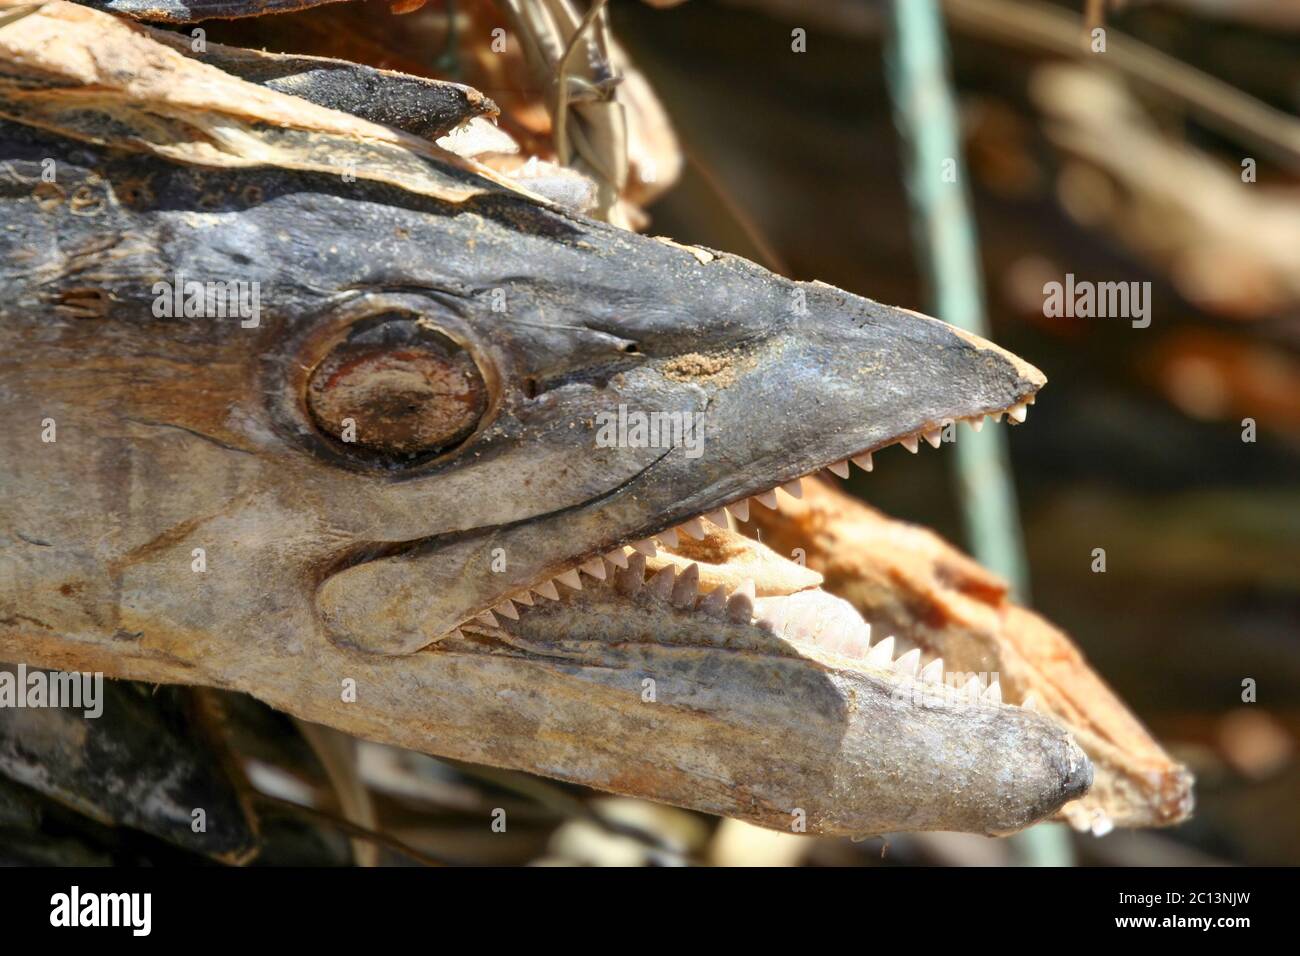 Dried fish for sale Stock Photo